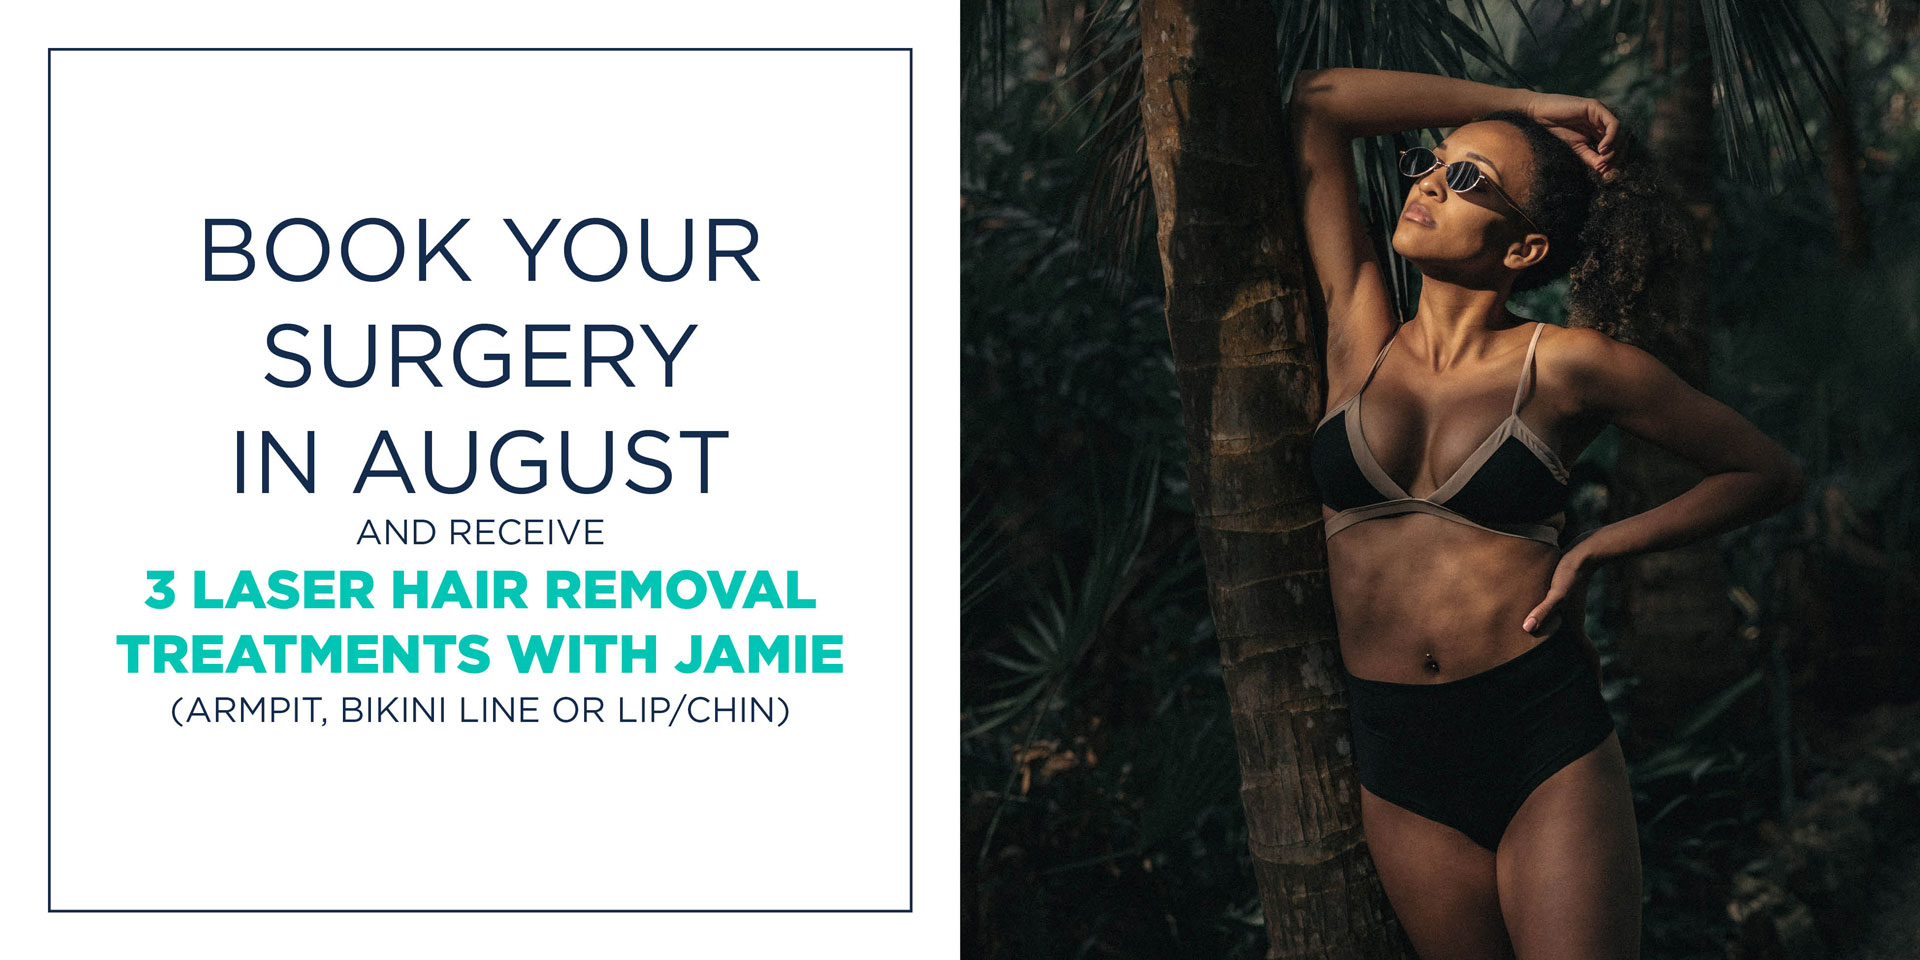 Book your Surgery in August & receive 3 Laser Hair Removal Treatments with Jamie. August Specials @ Sturm Cosmetics